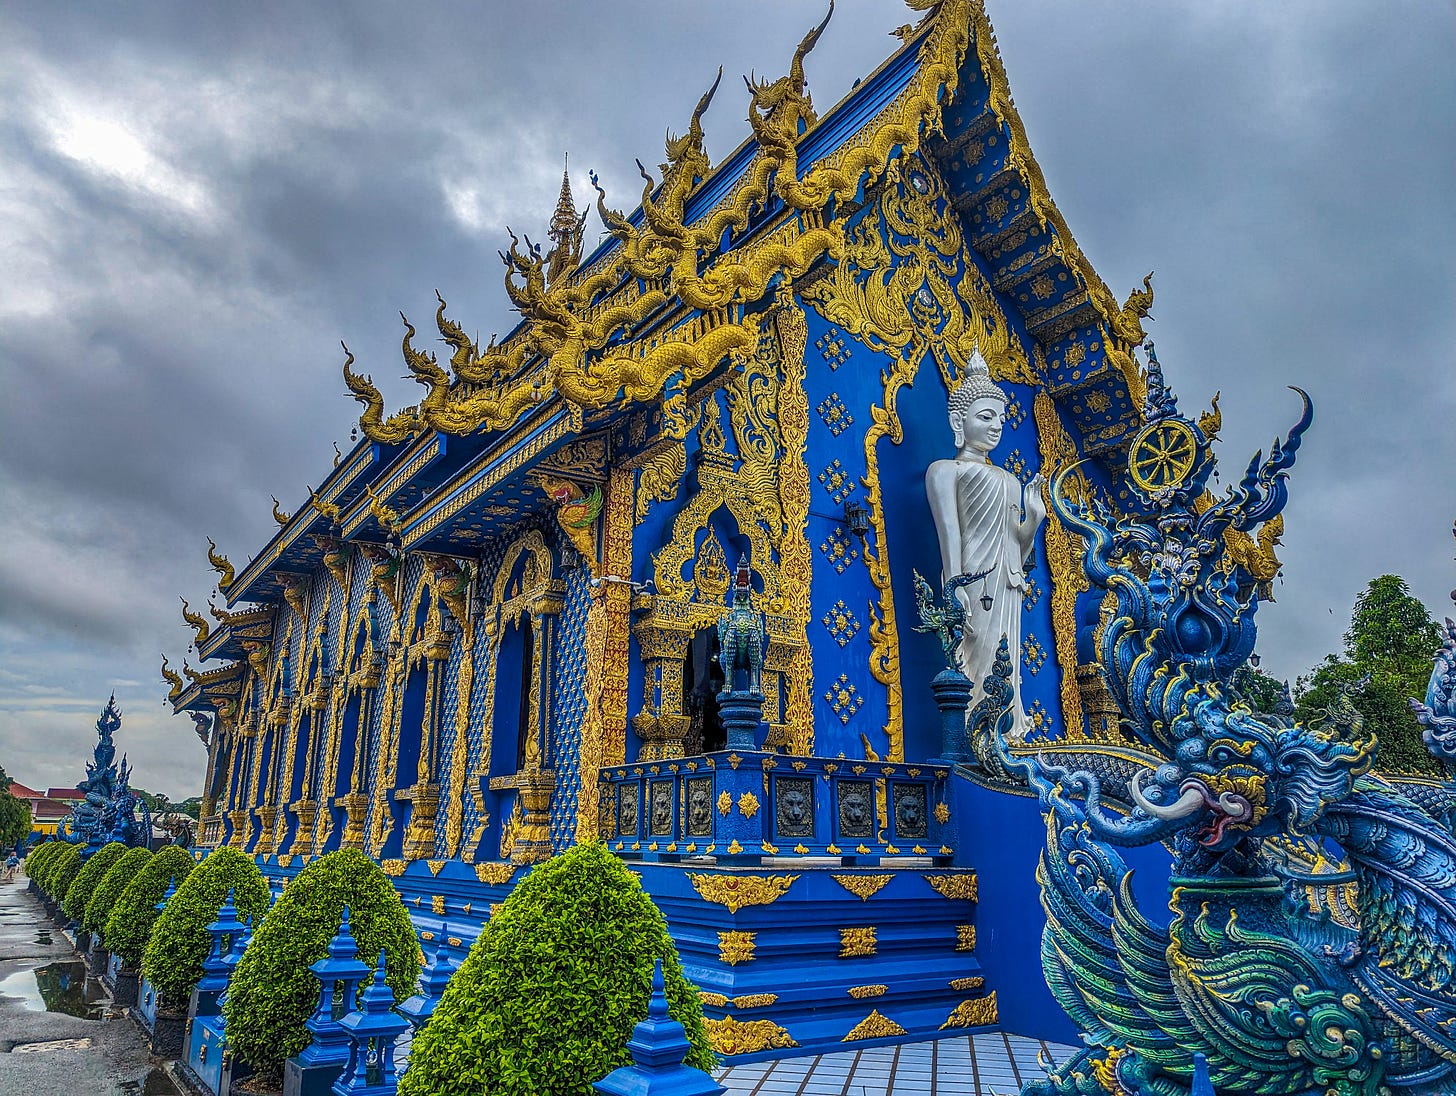 The ornately decorated Blue Temple which has lots of gold trim and other decorations. A white Buddha stands in front, a dragon guarding the entrance. 